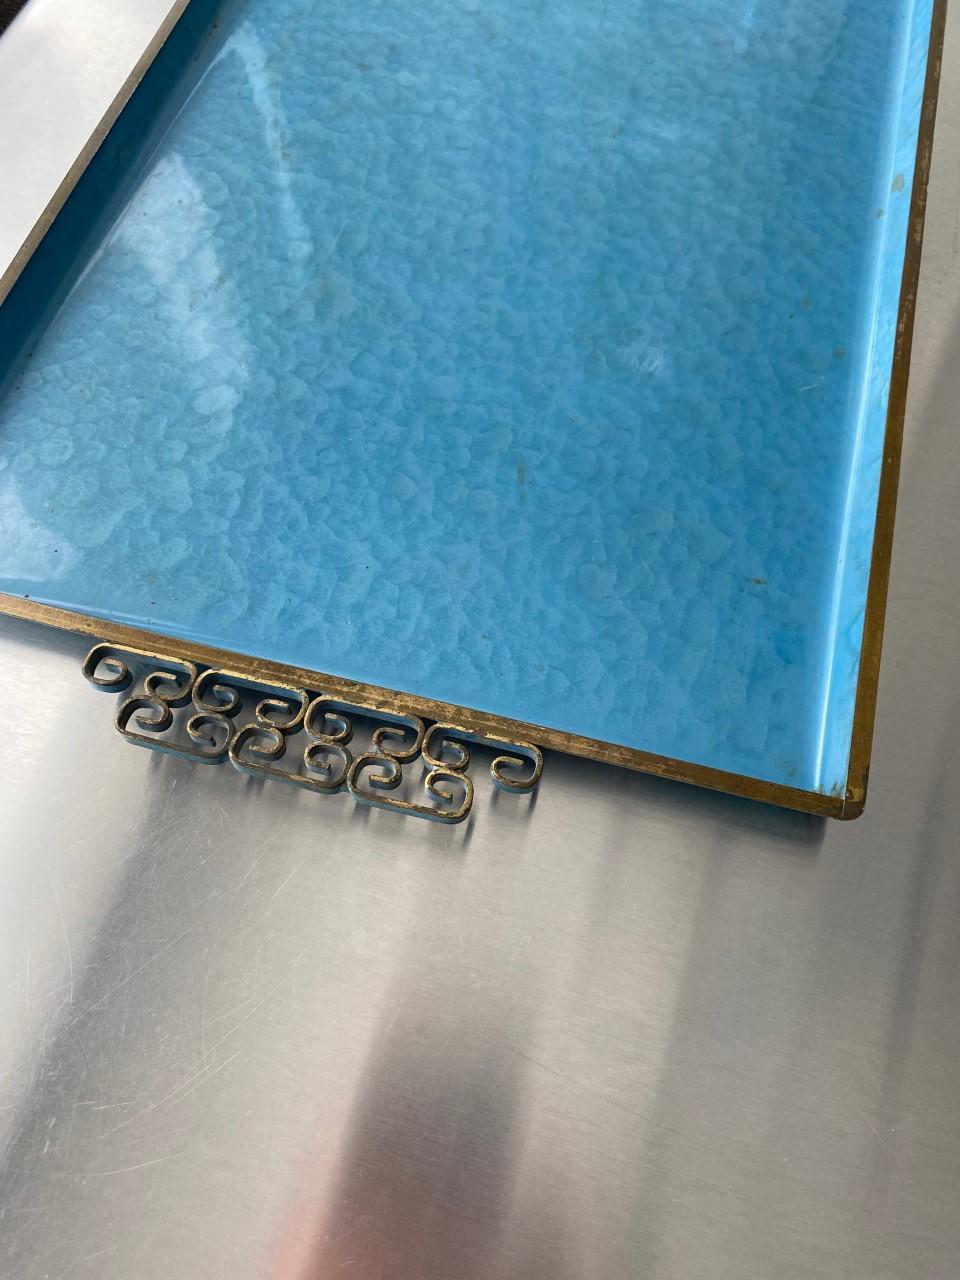 American Vintage Mid Century Kyes Moire’ Glaze Brass and Enamel Blue Tray 1960s